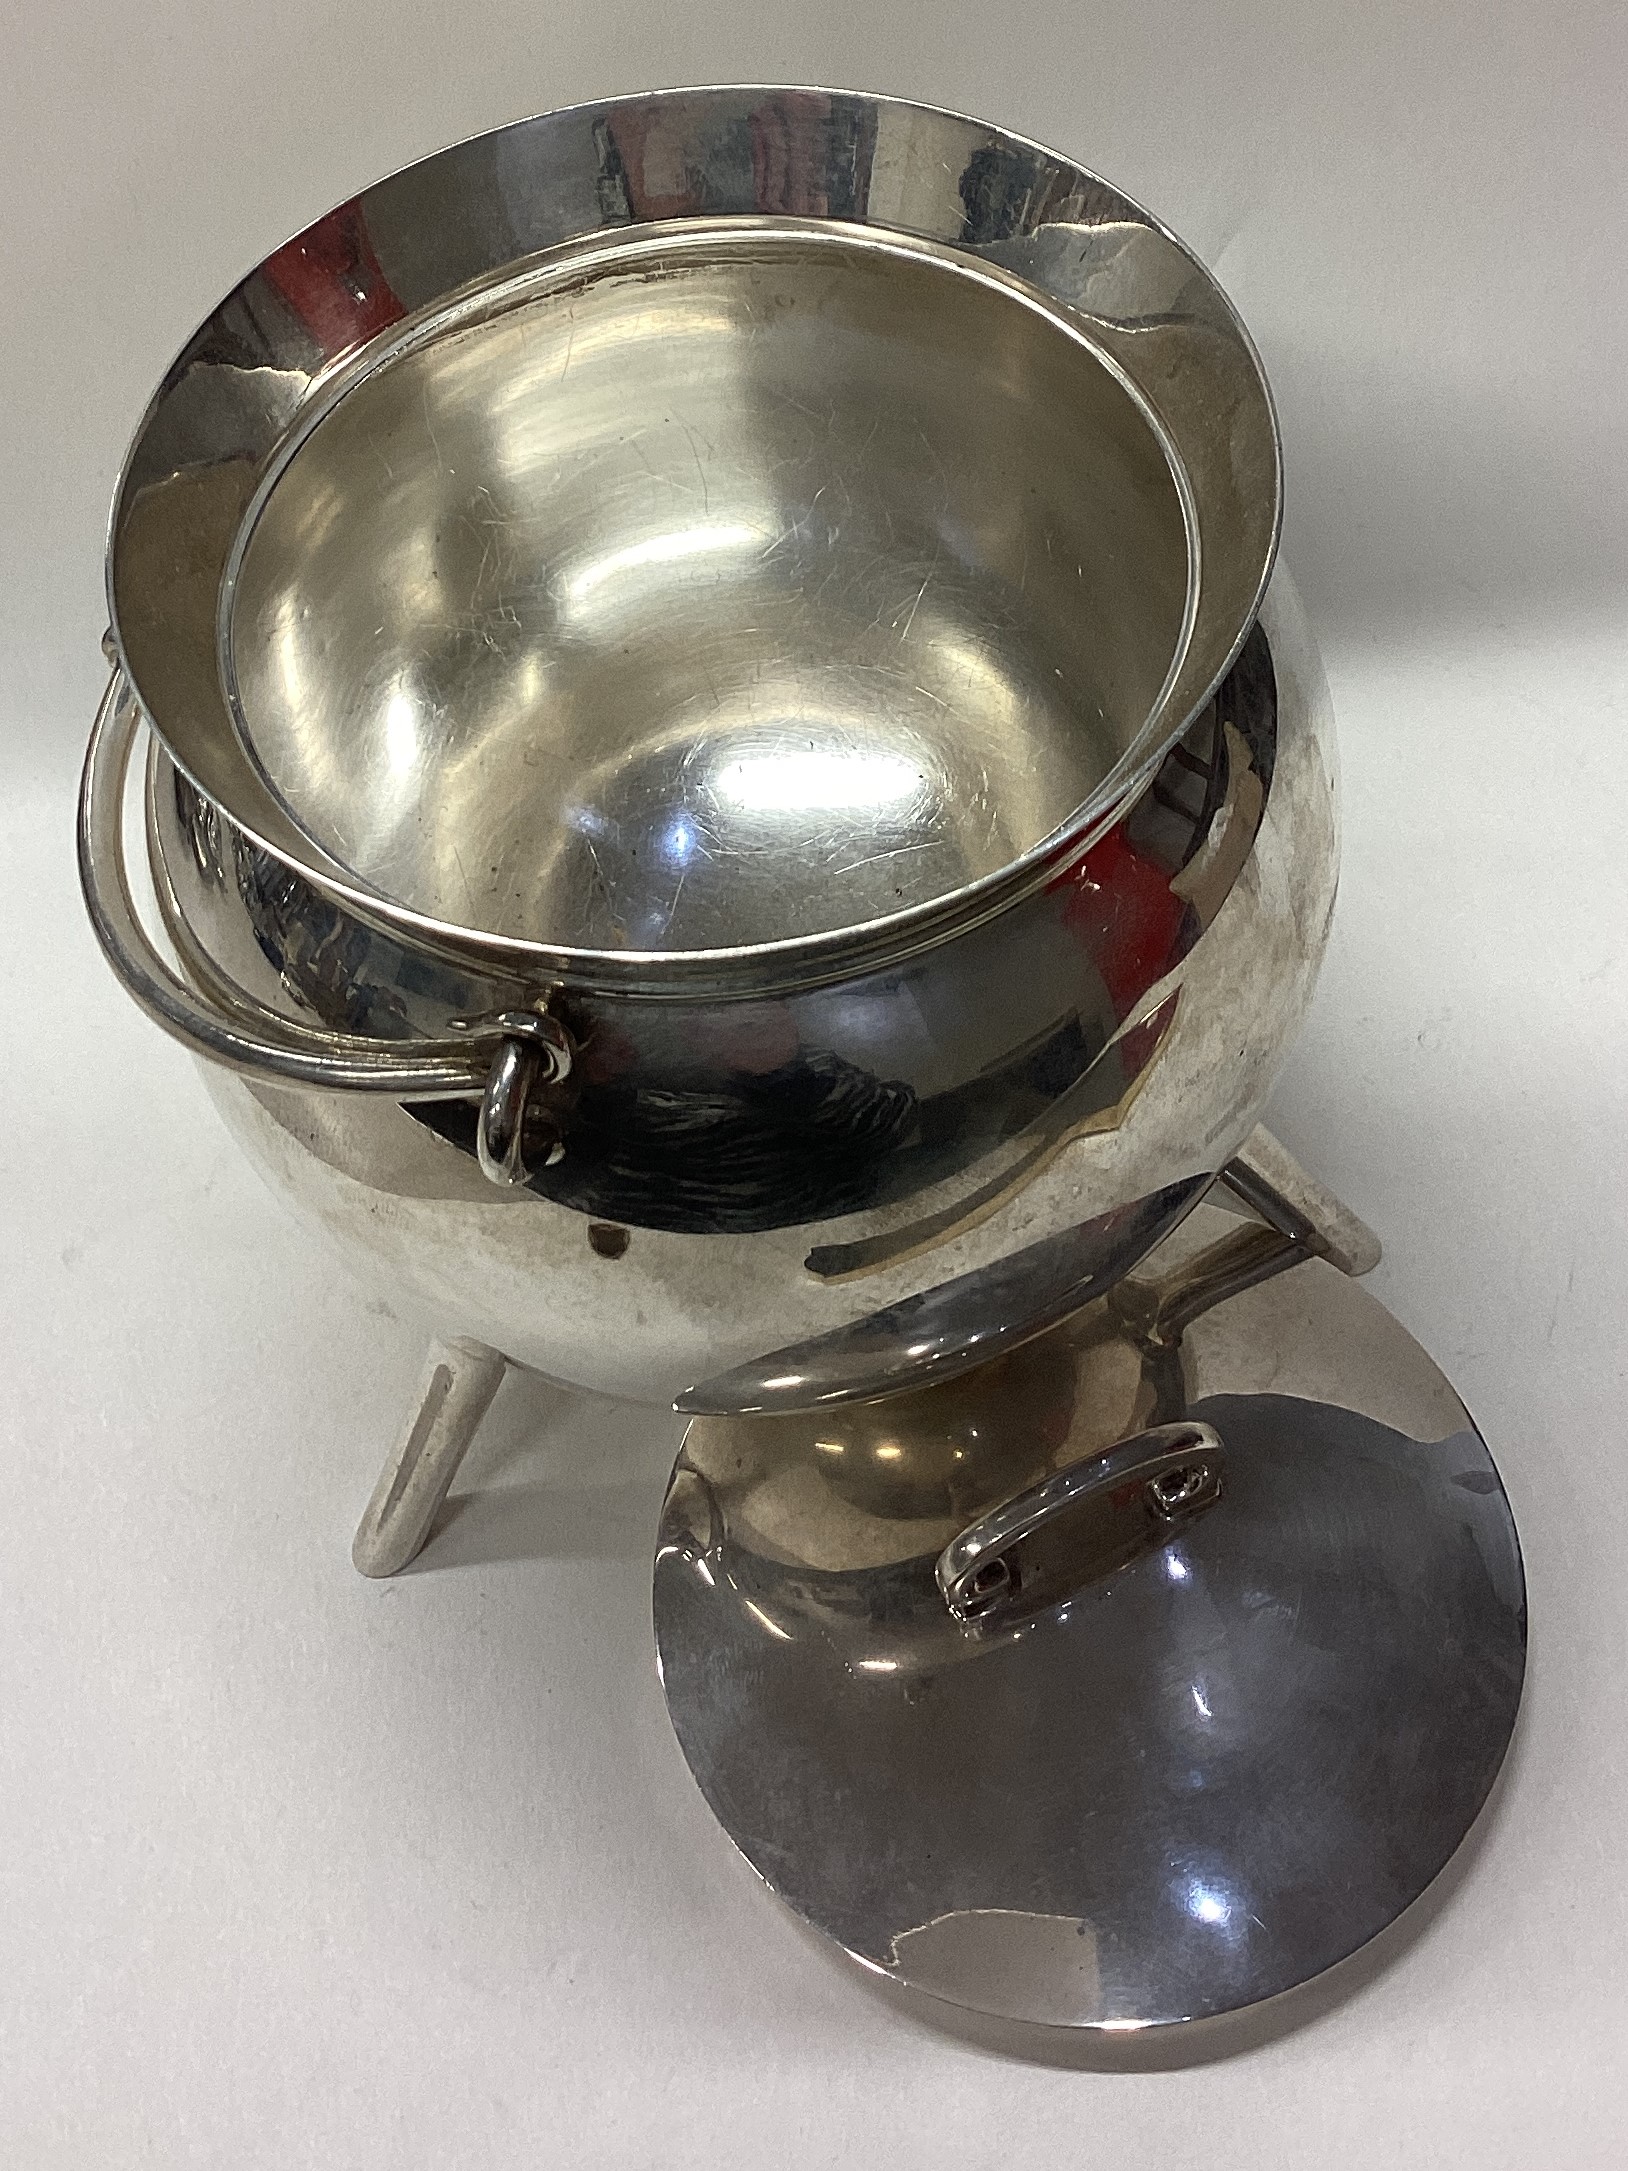 A rare novelty silver tea caddy in the form of a cauldron. - Image 3 of 4